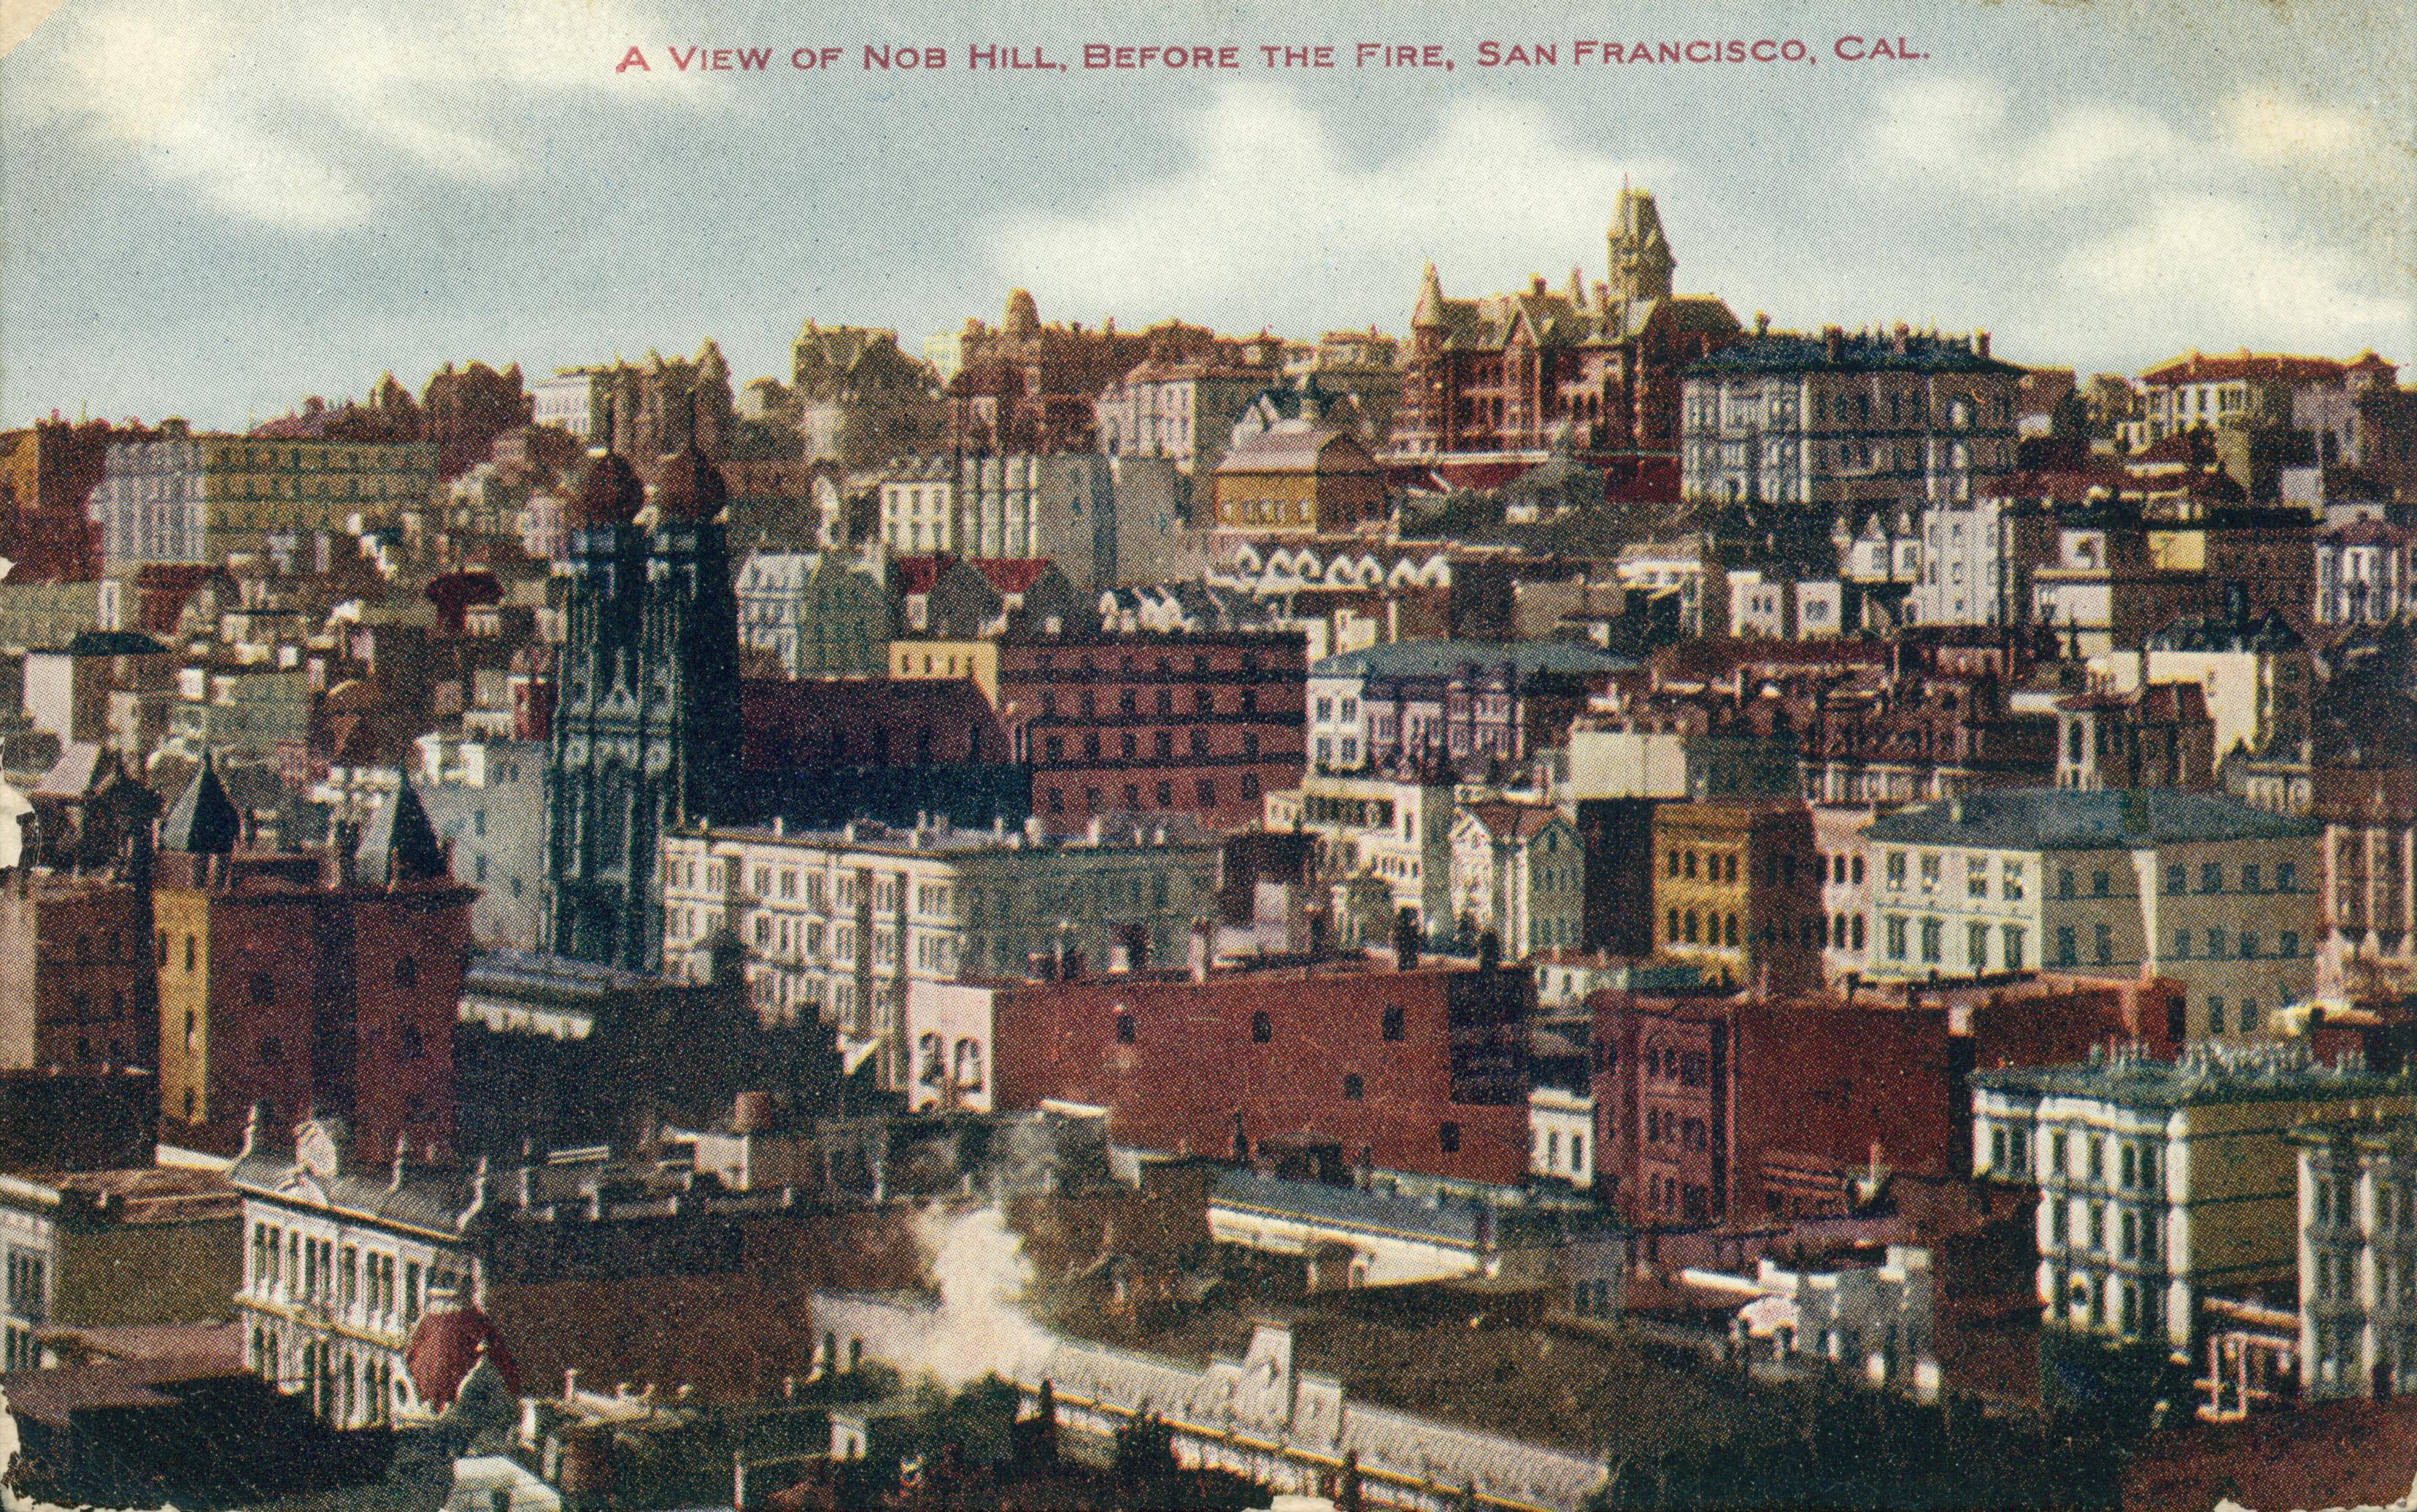 Shows a panoramic view of San Francisco prior to the earthquake